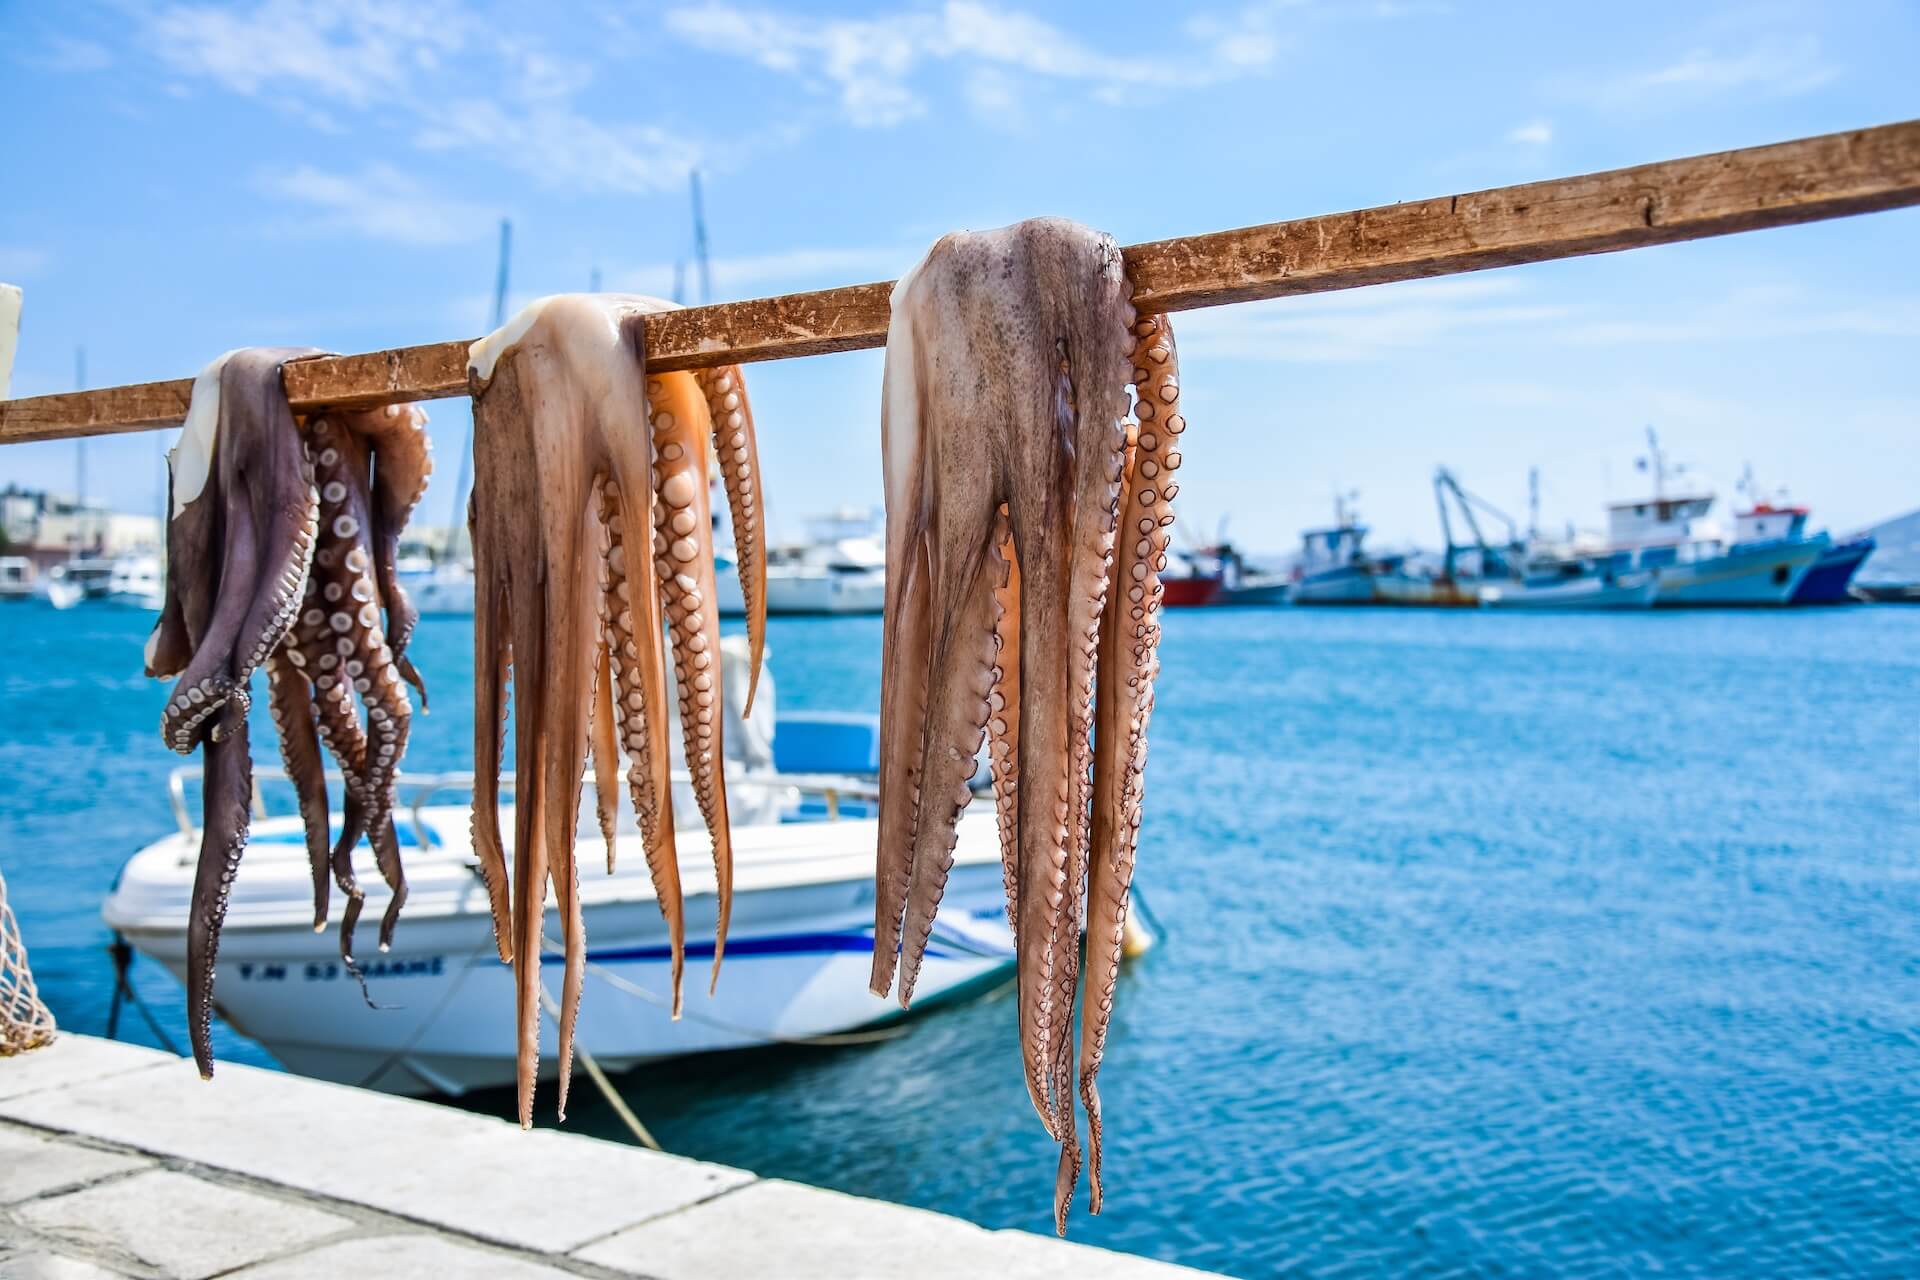 Octopus drying  in the sun